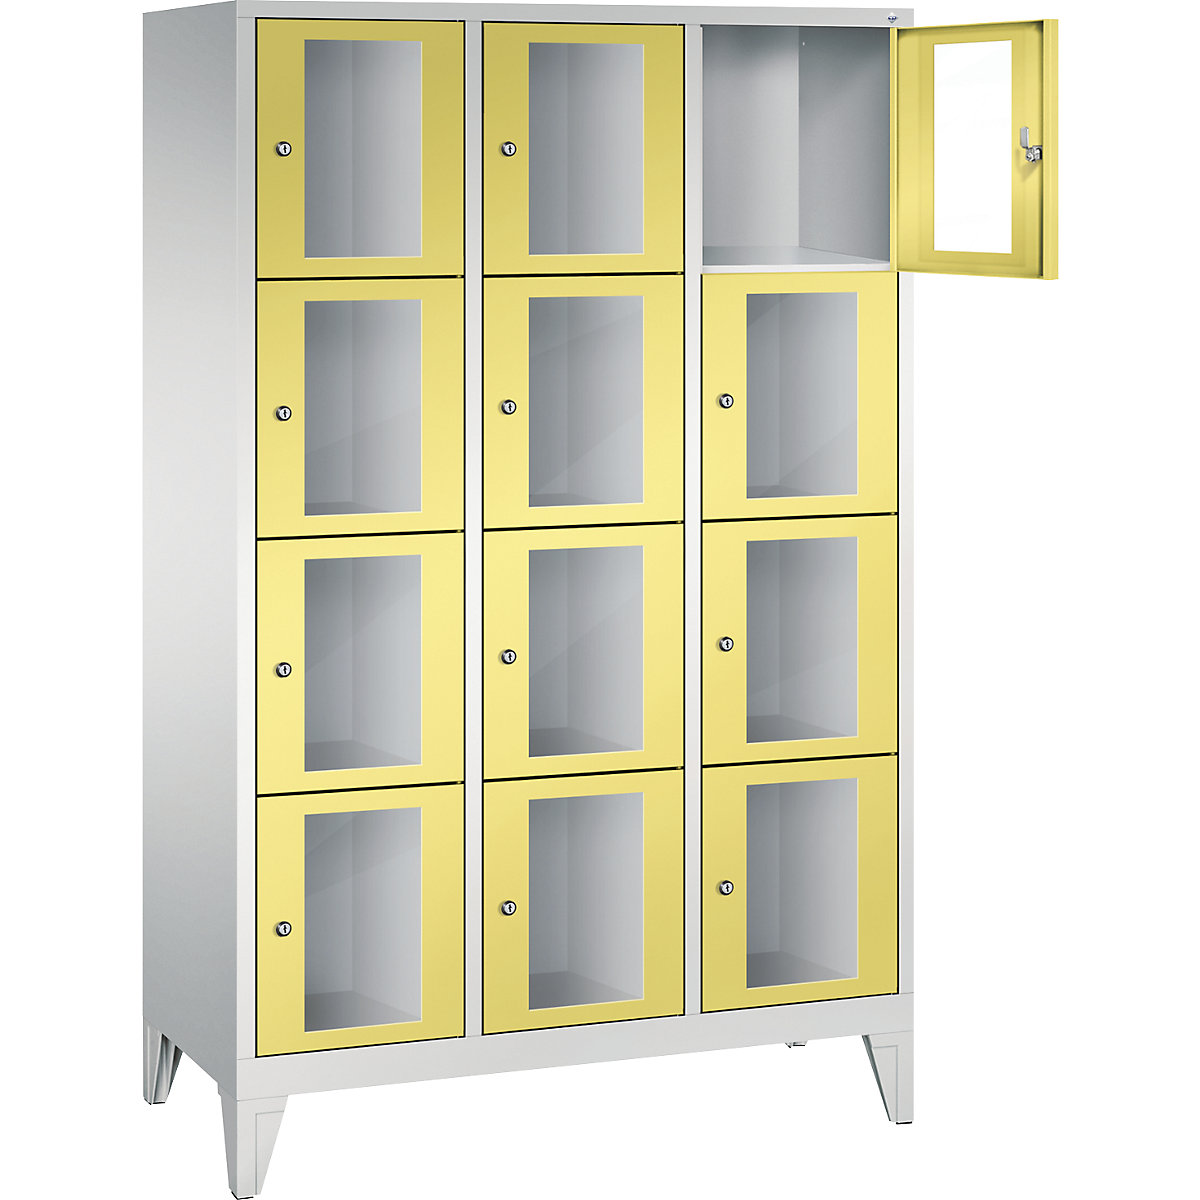 C+P – CLASSIC locker unit, compartment height 375 mm, with feet, 12 compartments, width 1200 mm, sulphur yellow door